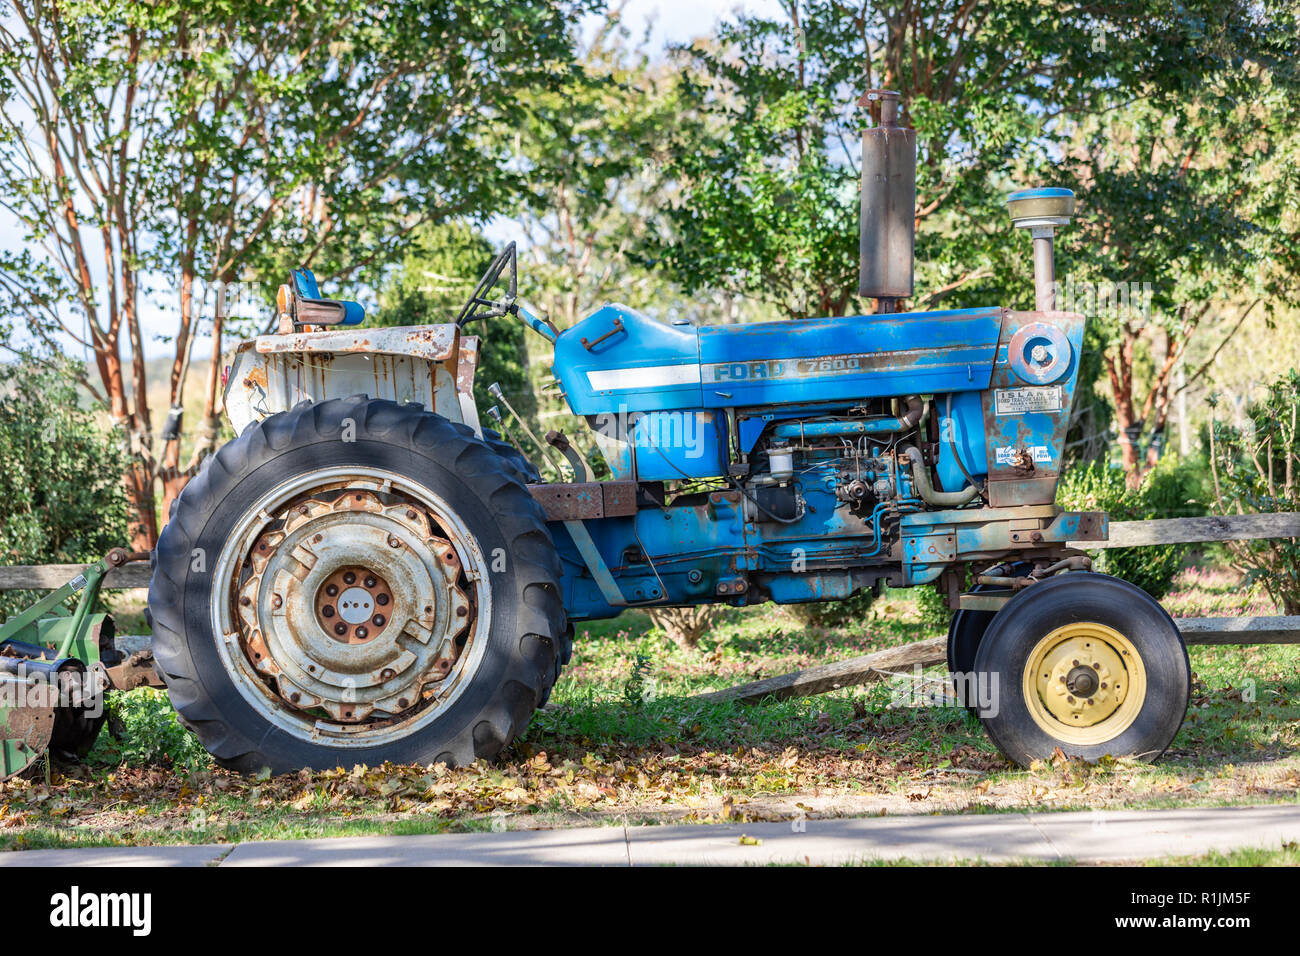 A well used blue Ford farm tractor in Wainscott, NY Stock Photo